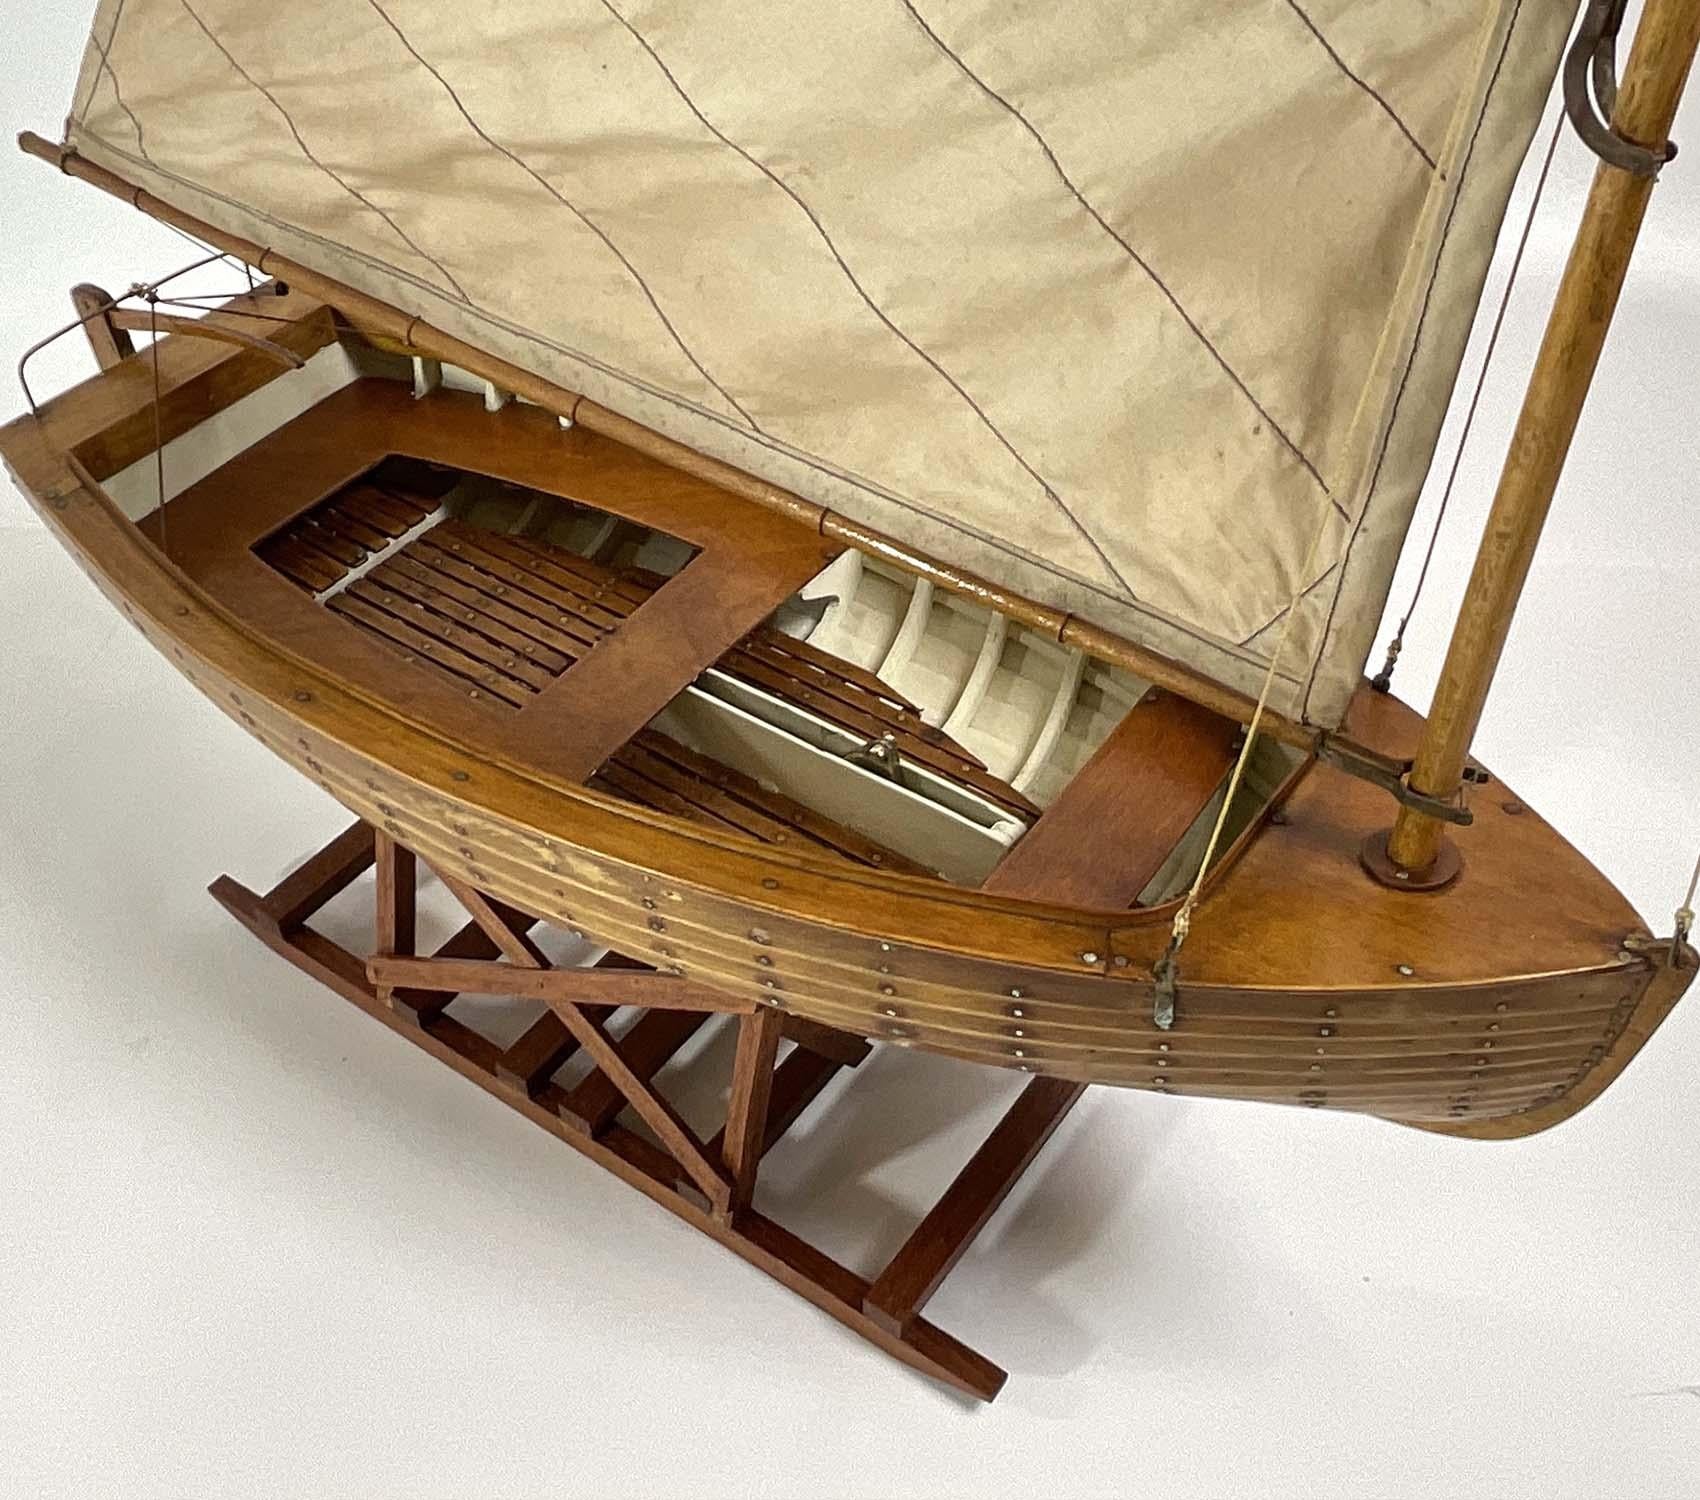 Mid-20th Century Antique Open Hulled Planked Sloop